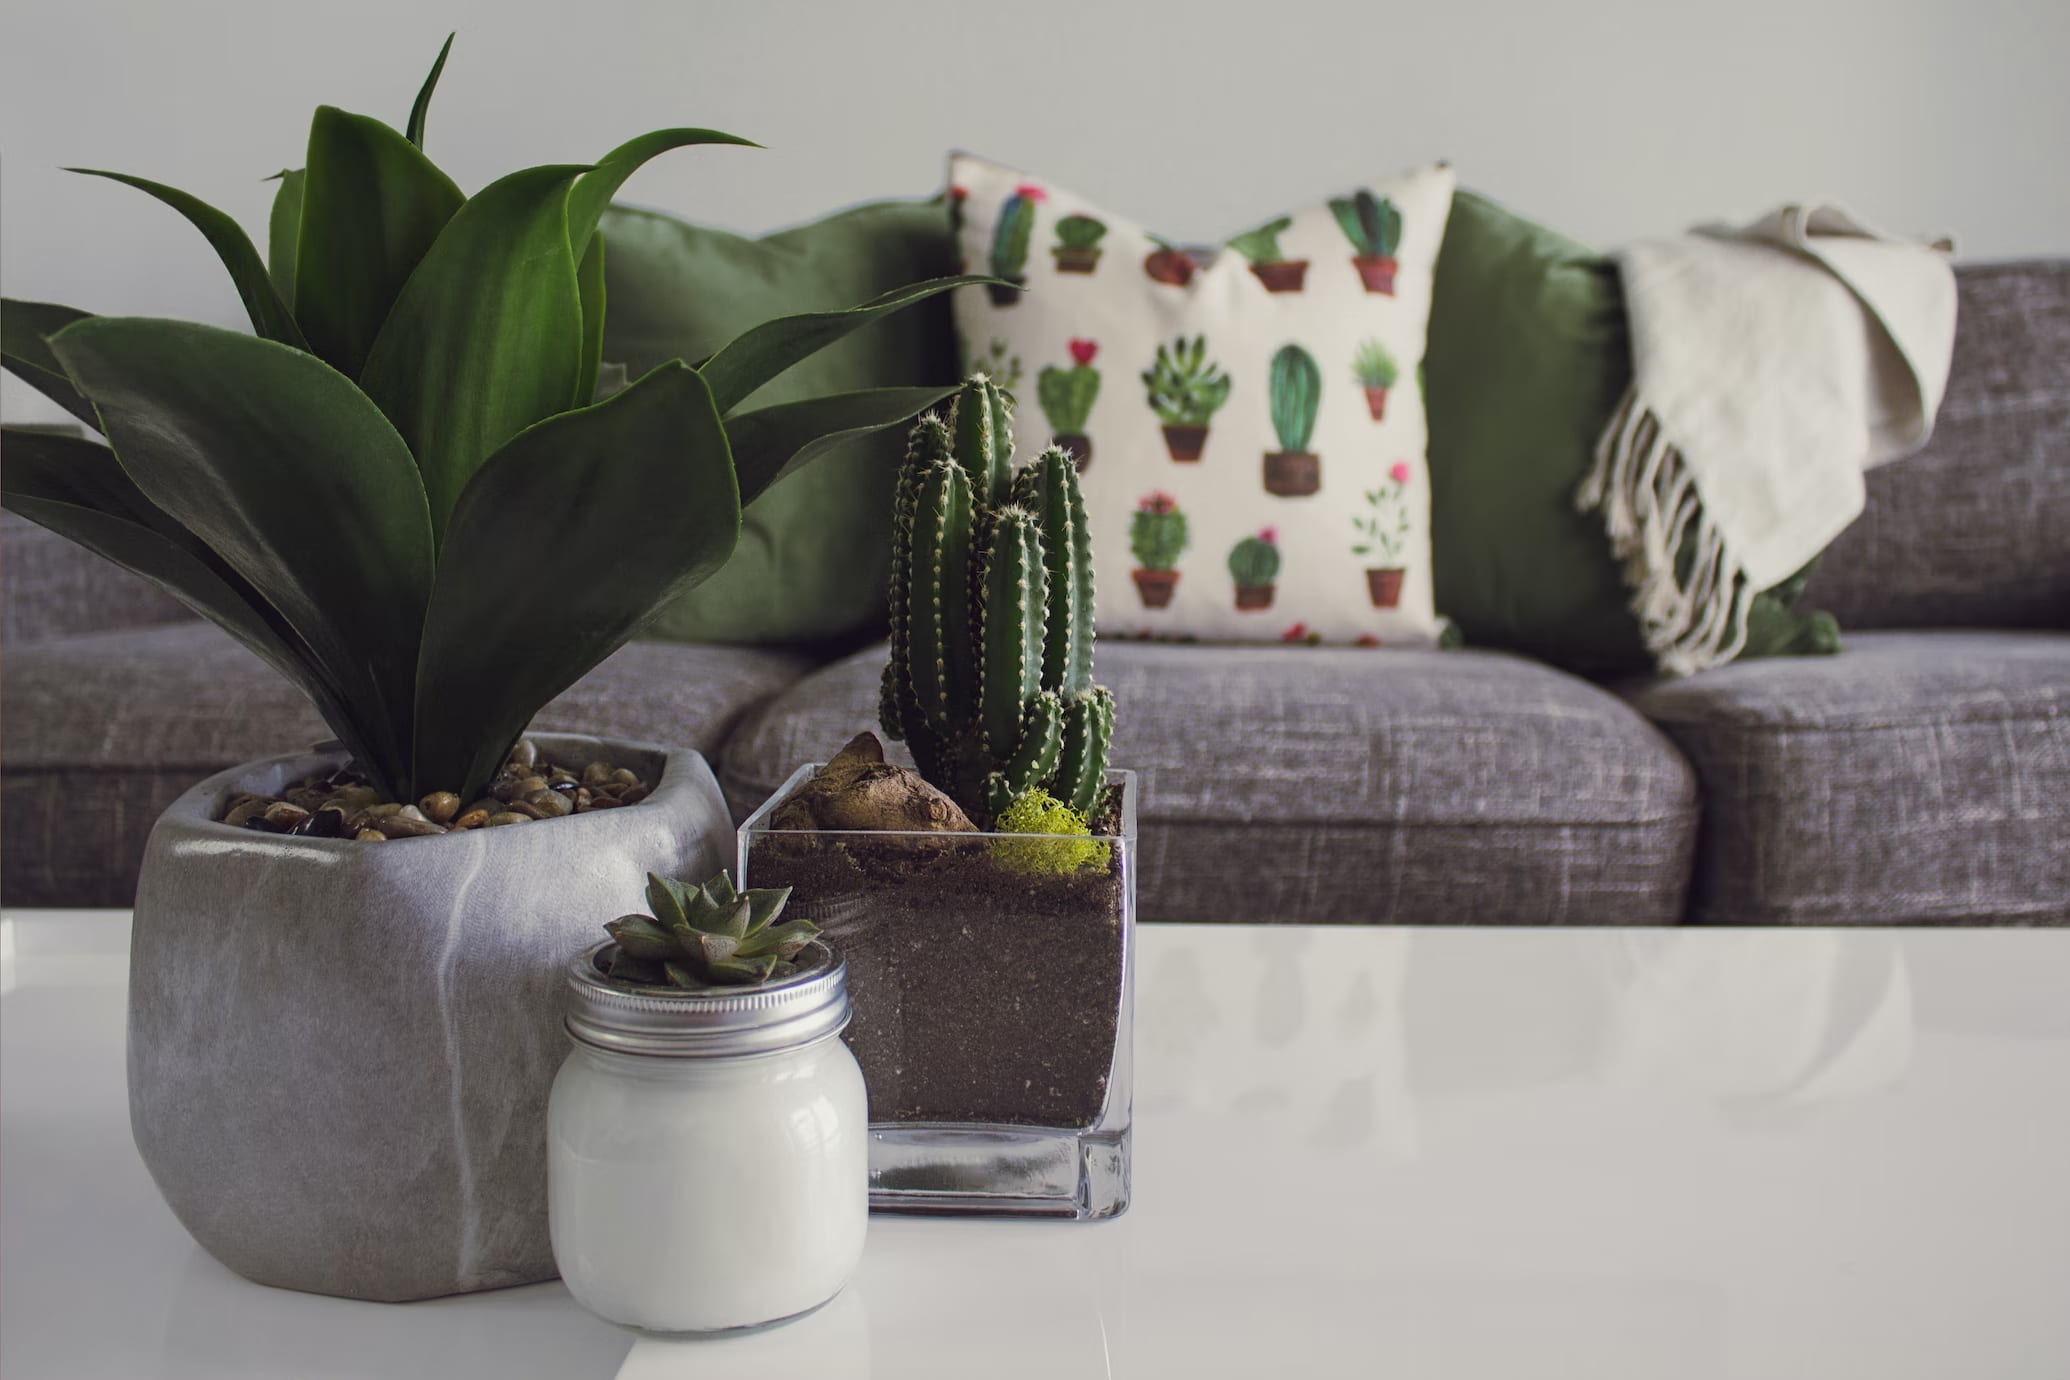 cacti planters placed on table, living room decor, sofa, cushions